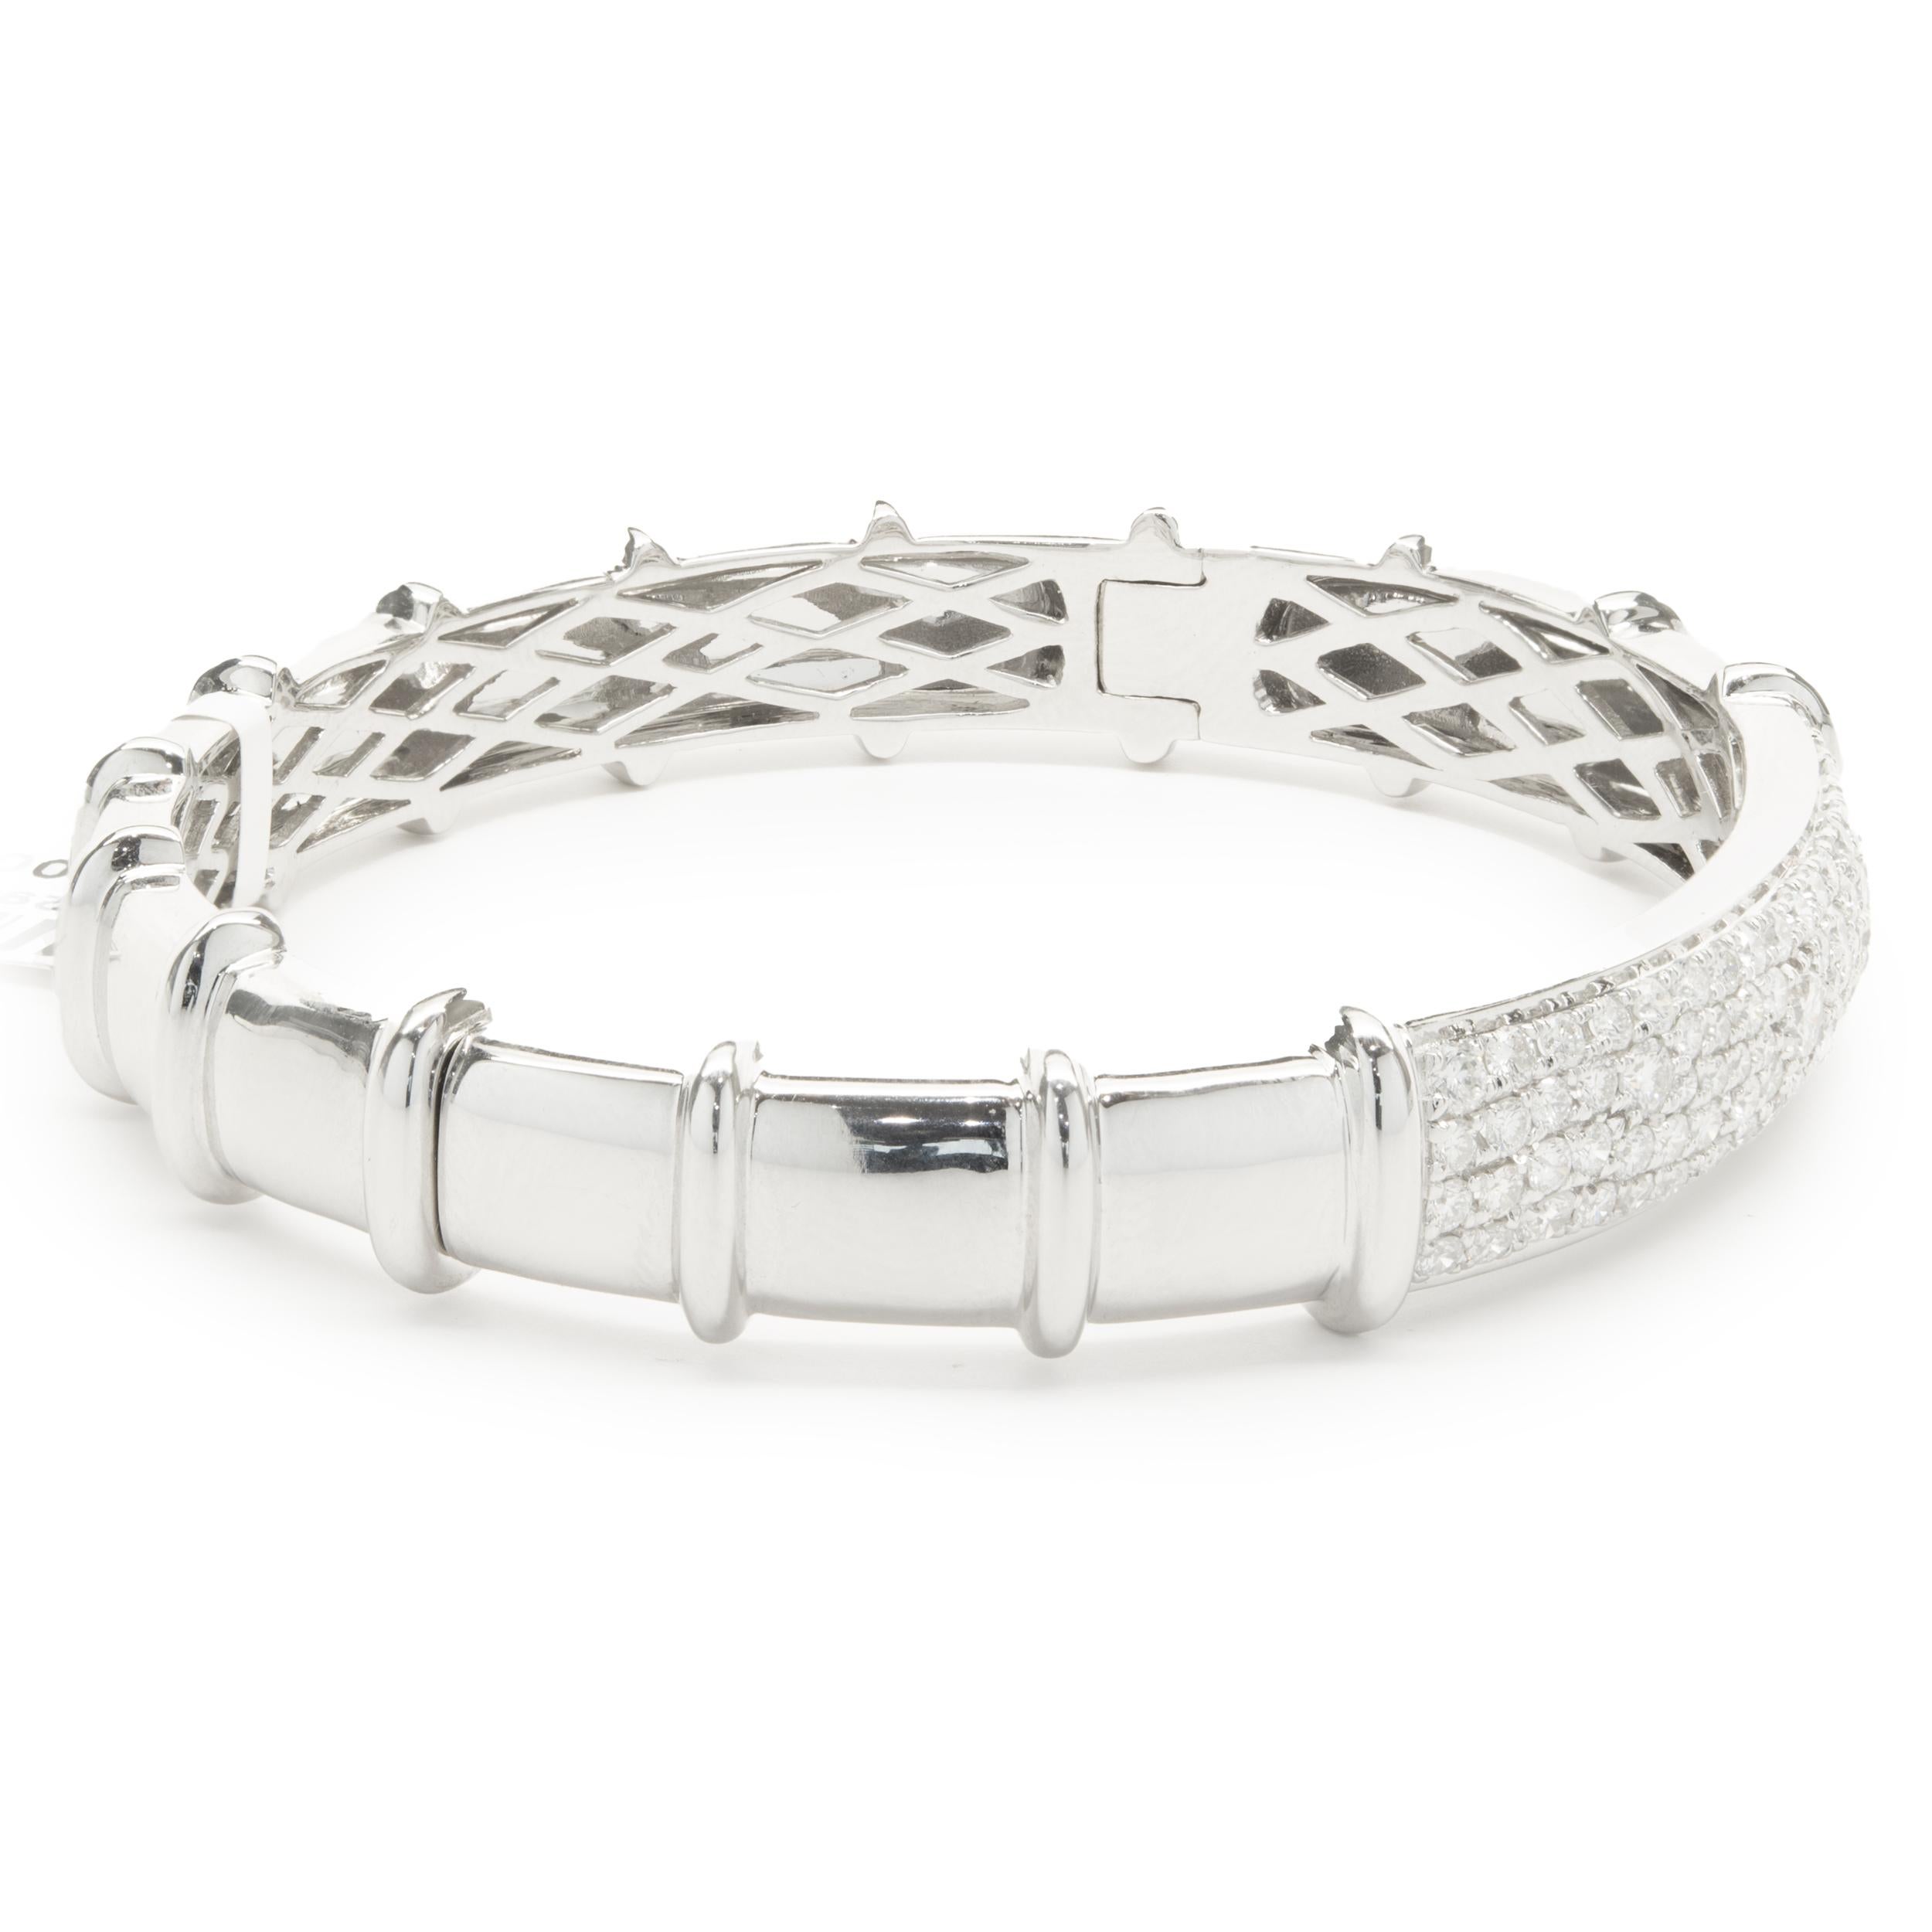 Designer: custom
Material: 18K white gold
Diamond: 81 round brilliant= 2.02cttw
Color: G 
Clarity: VS1
Dimensions: bracelet will fit up to a 7-inch wrist
Weight: 37.28 grams